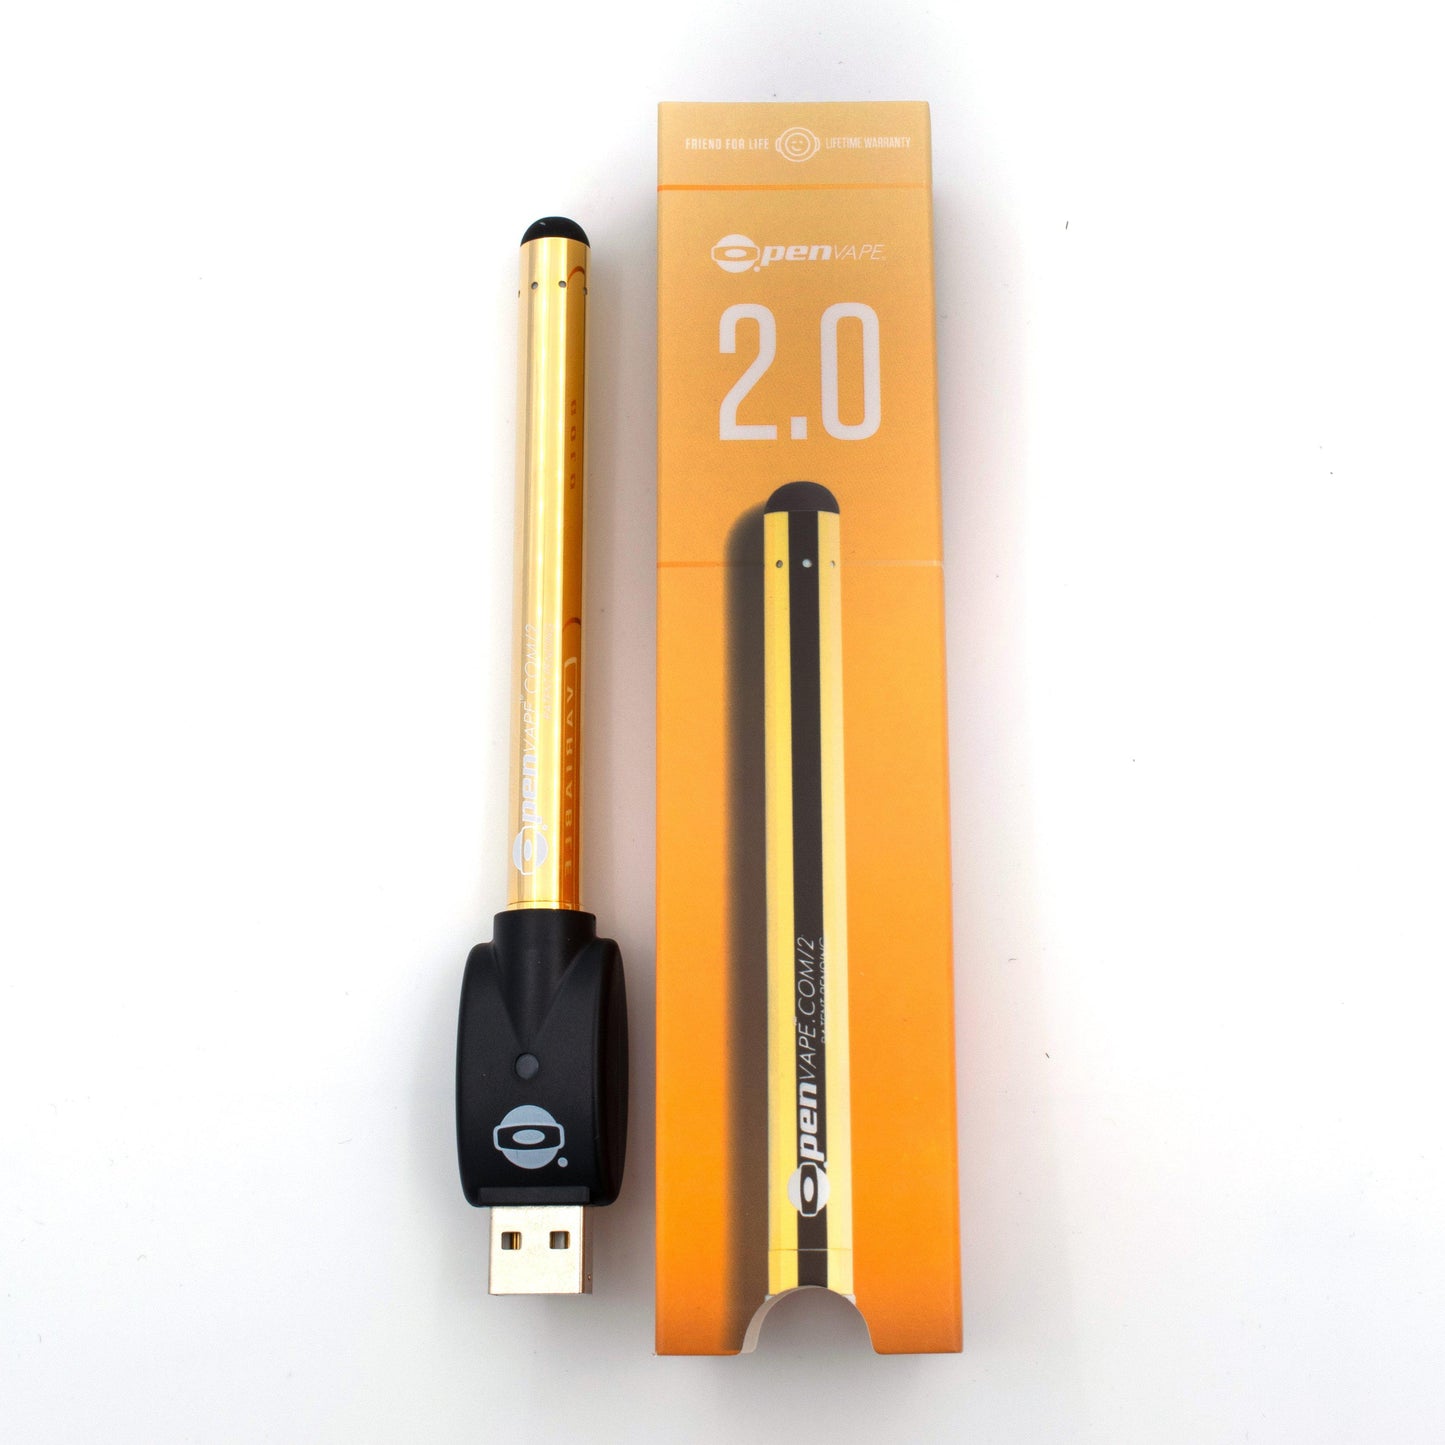 O.pen 2.0 Variable Voltage 510T Vape Battery w/ USB Charger